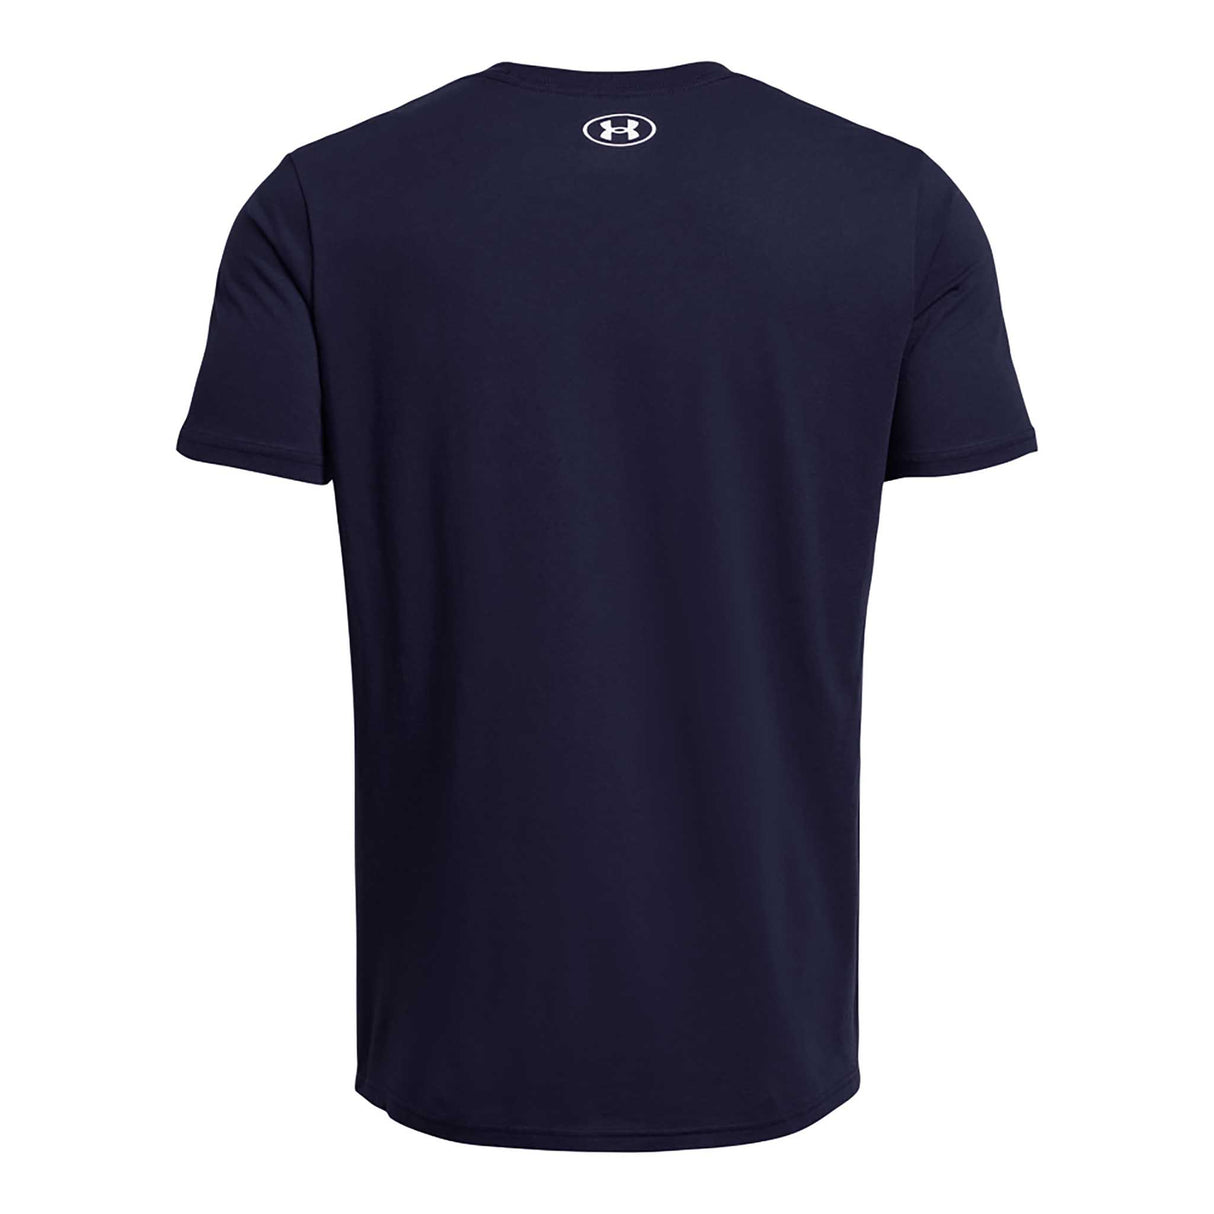 Under Armour Camo t-shirt à manches courtes homme dos - Midnight Navy / White